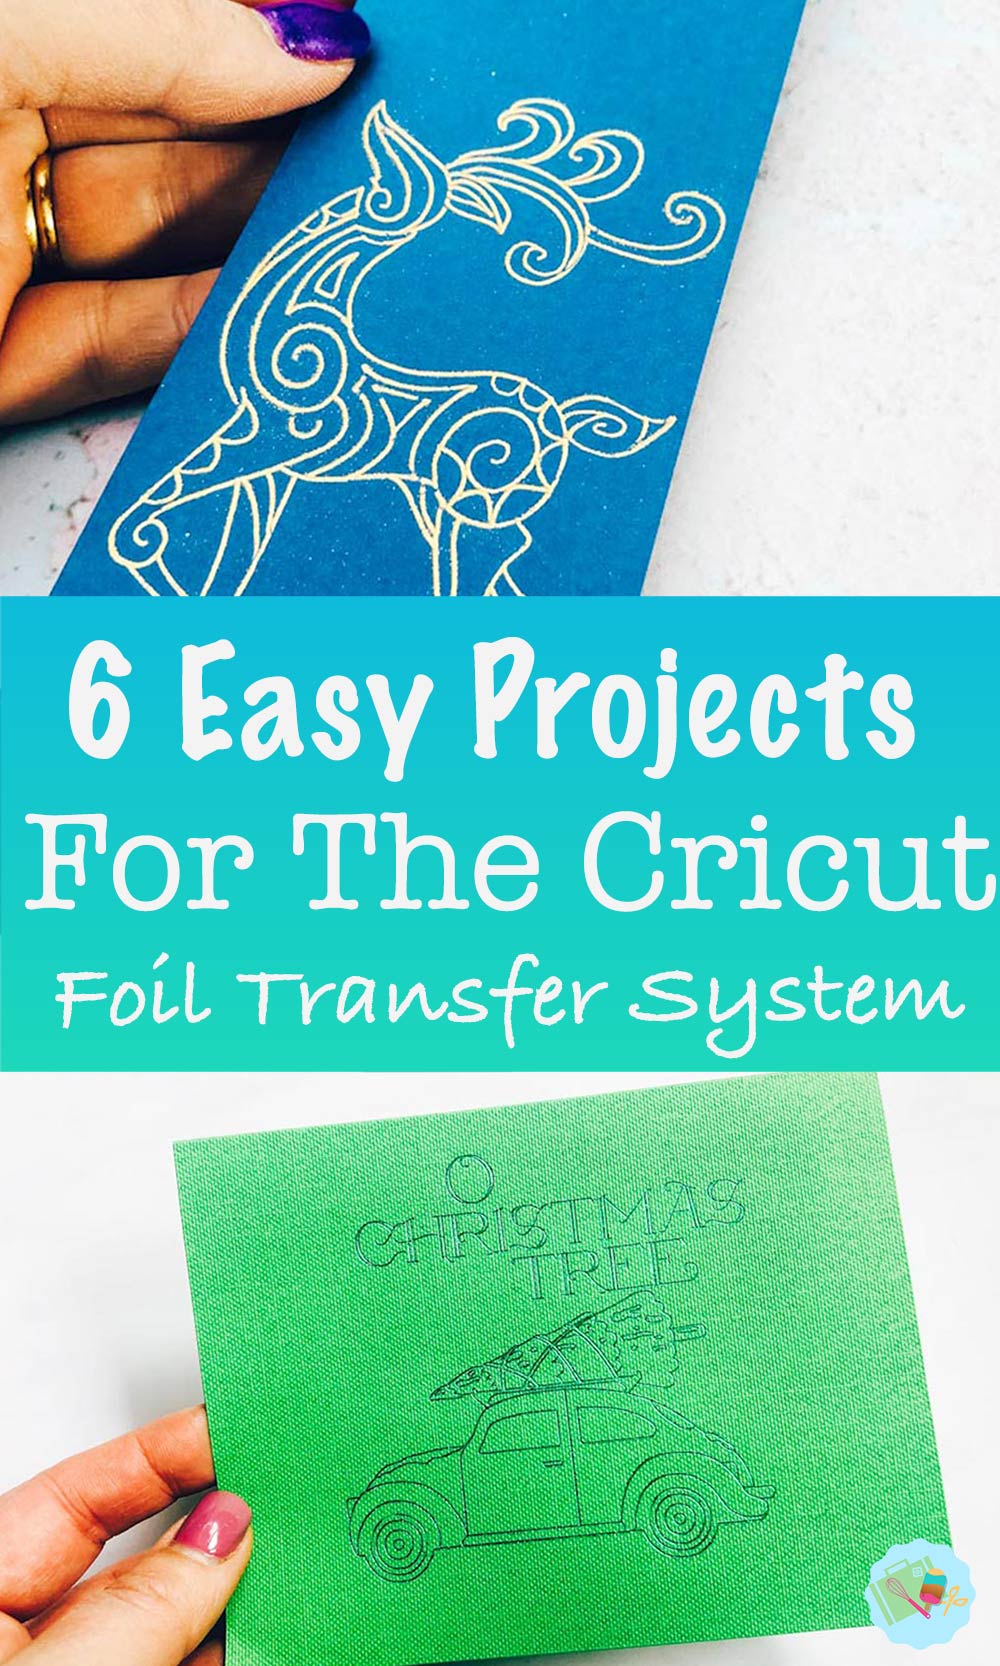 6 easy projects for the Cricut Foil Transfer system